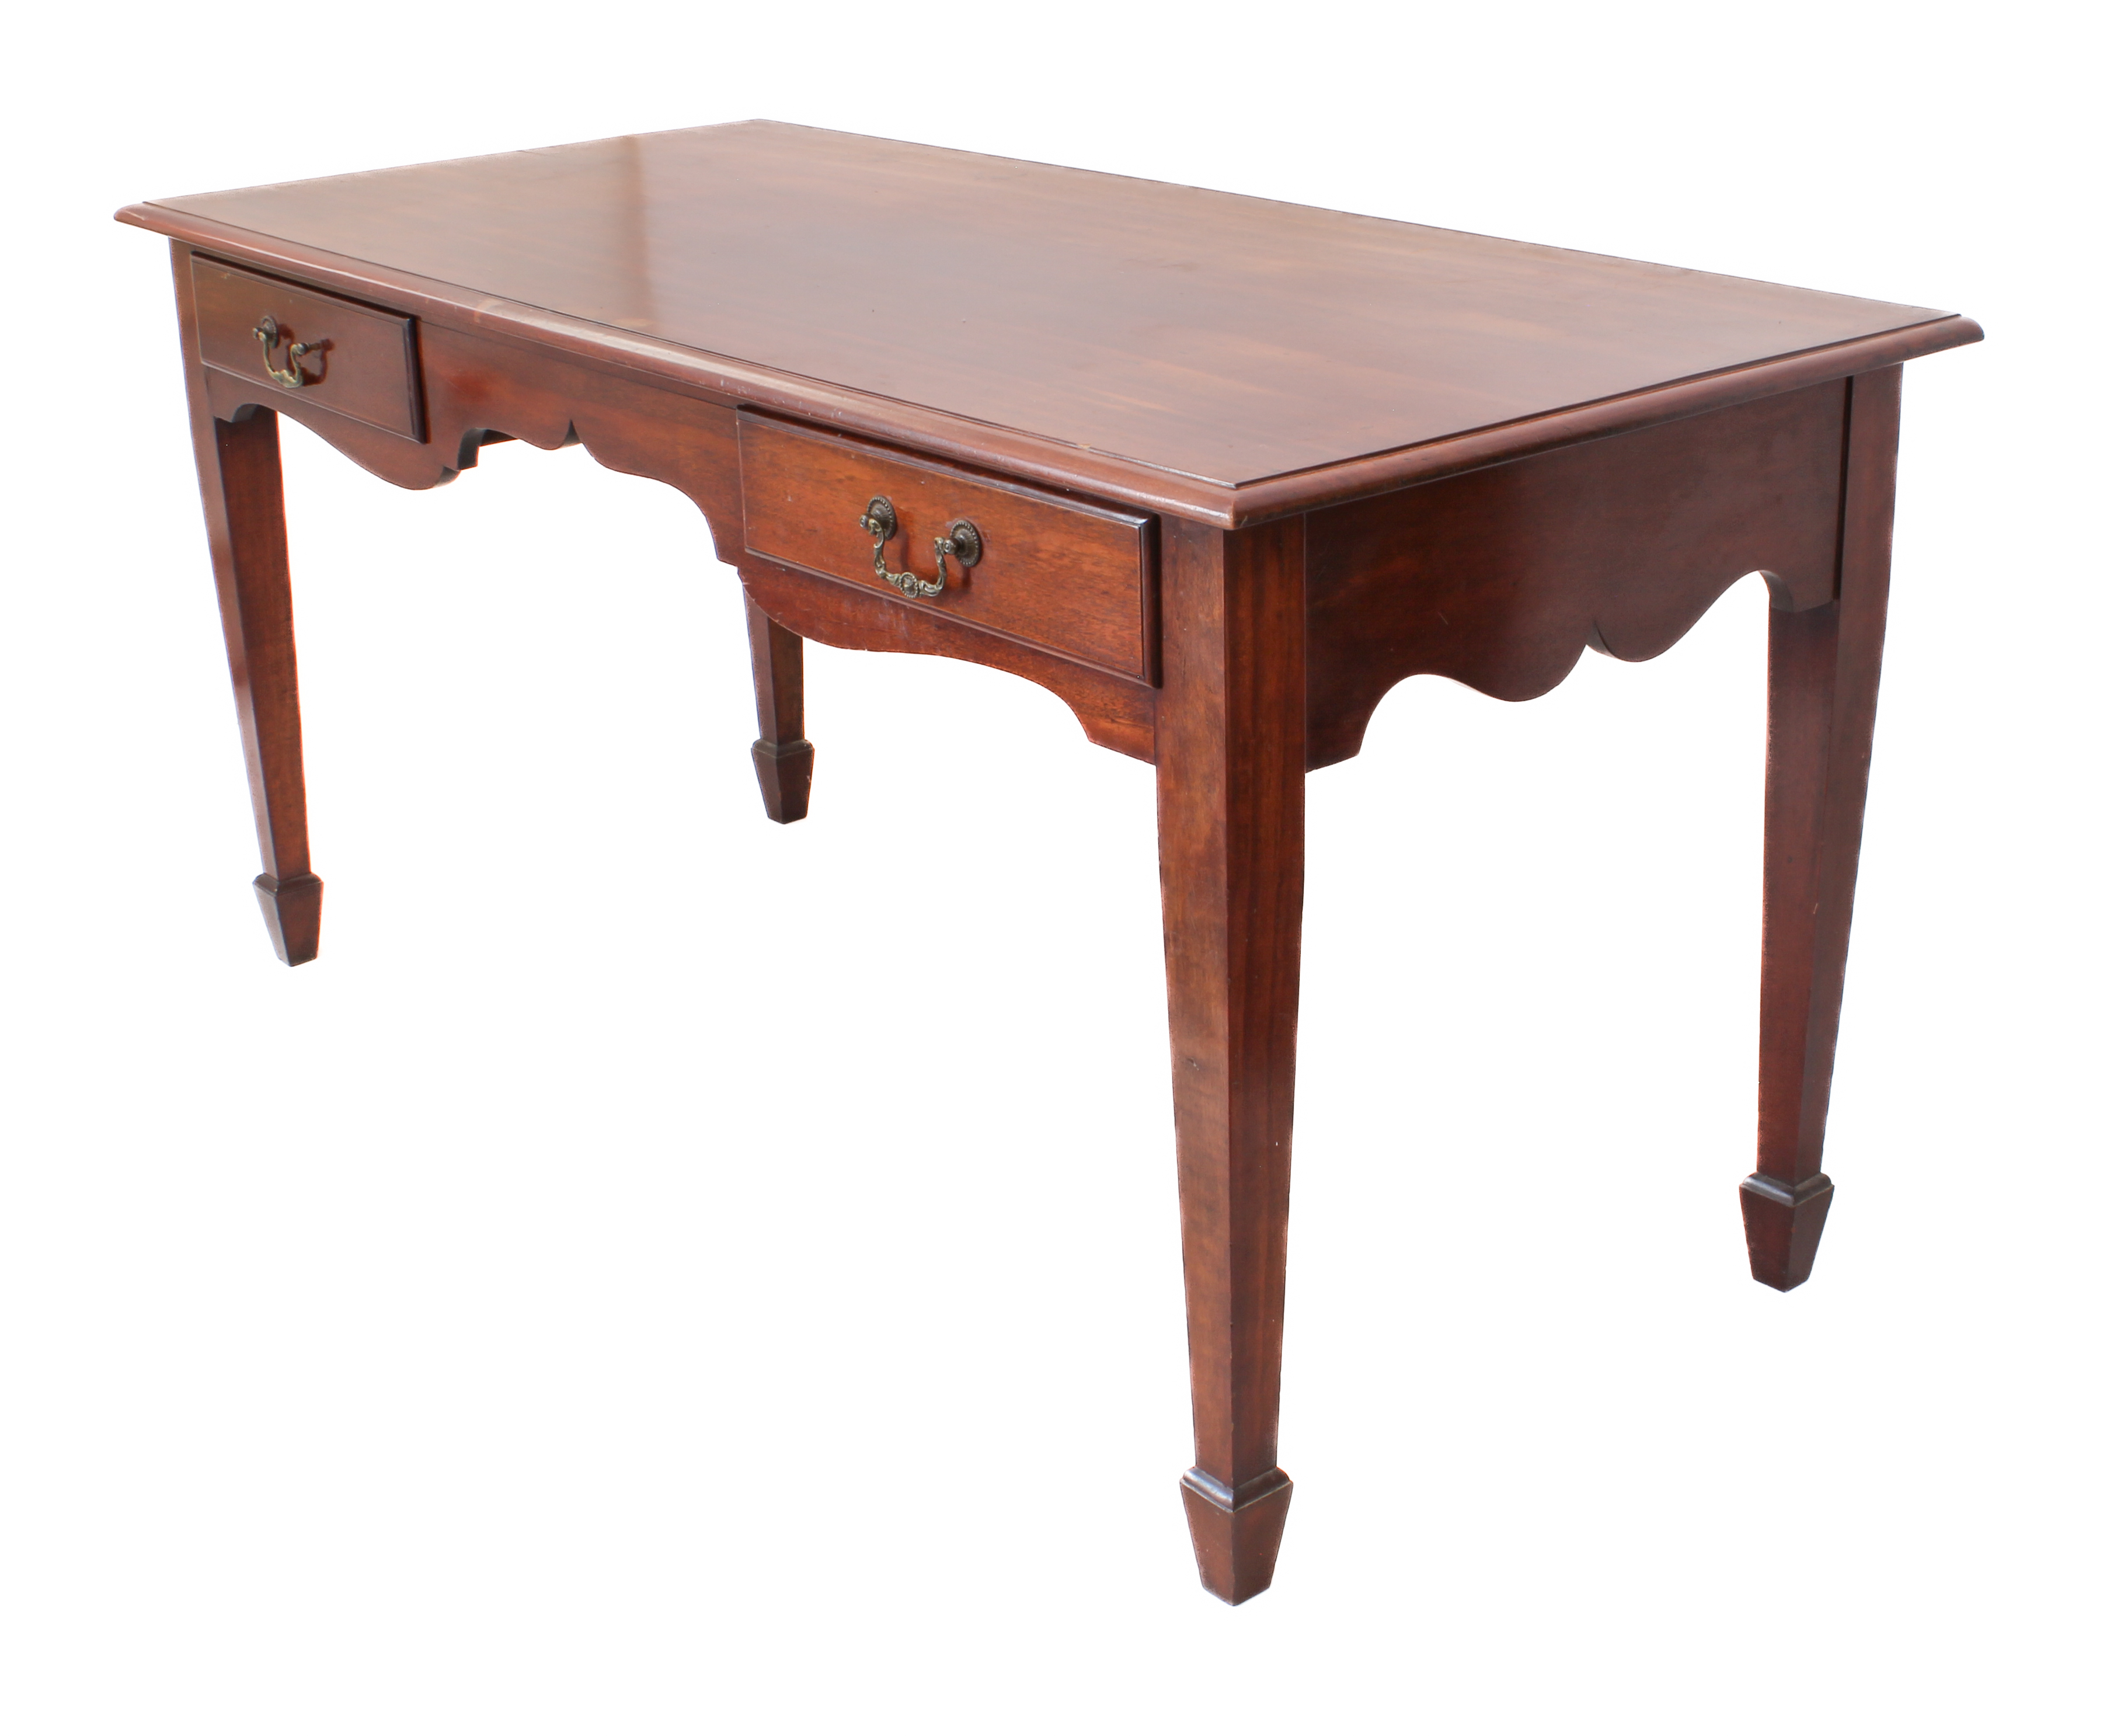 An Edwardian mahogany two-drawer library or writing table - the moulded top over two frieze